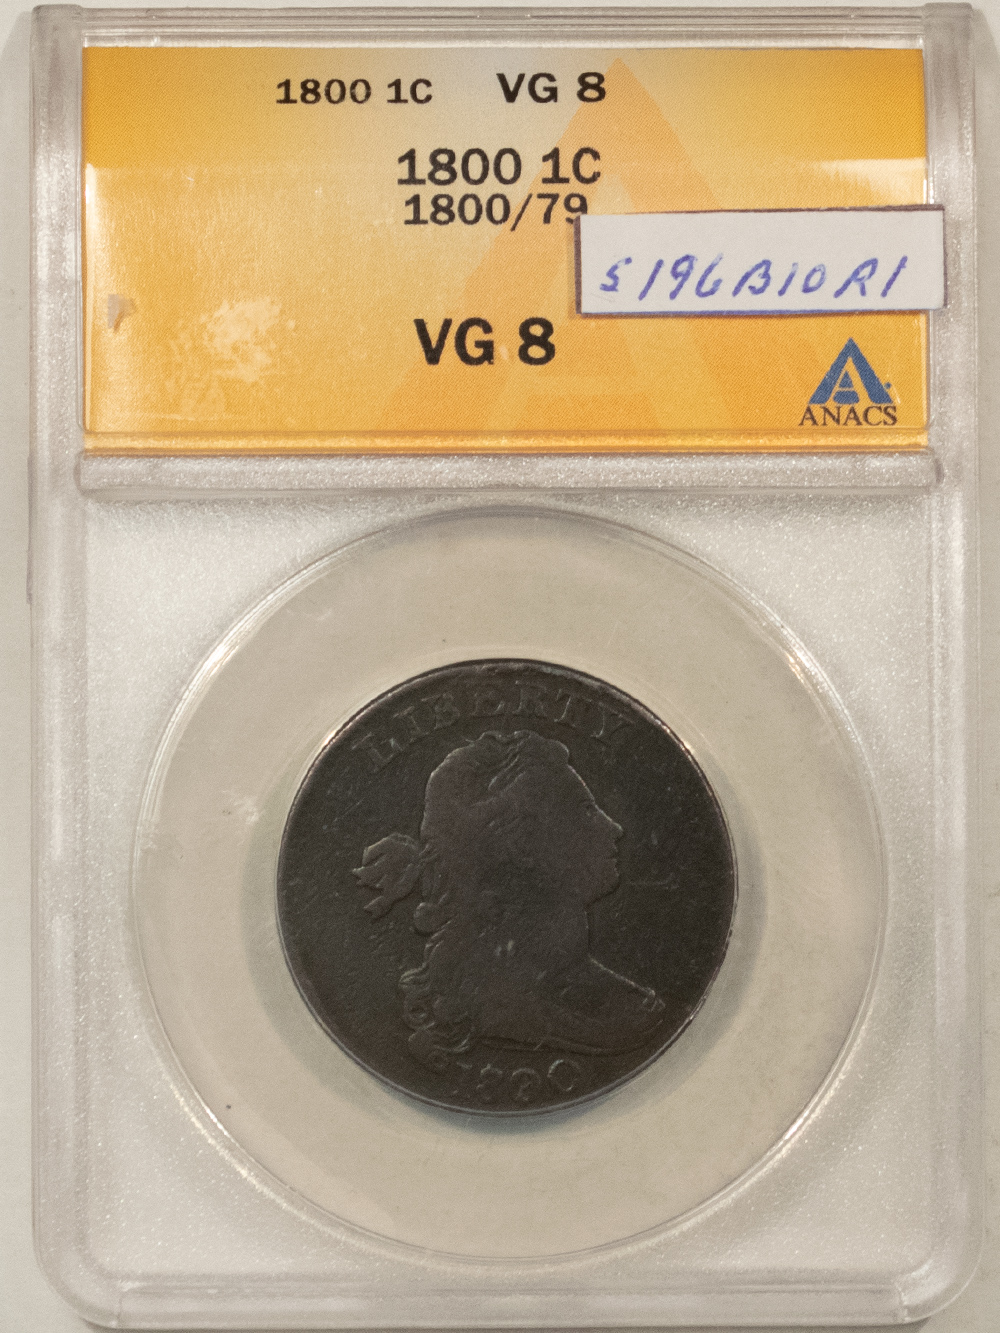 1800 DRAPED BUST LARGE CENT - 1800/79 - ANACS VG-8, SMOOTH!